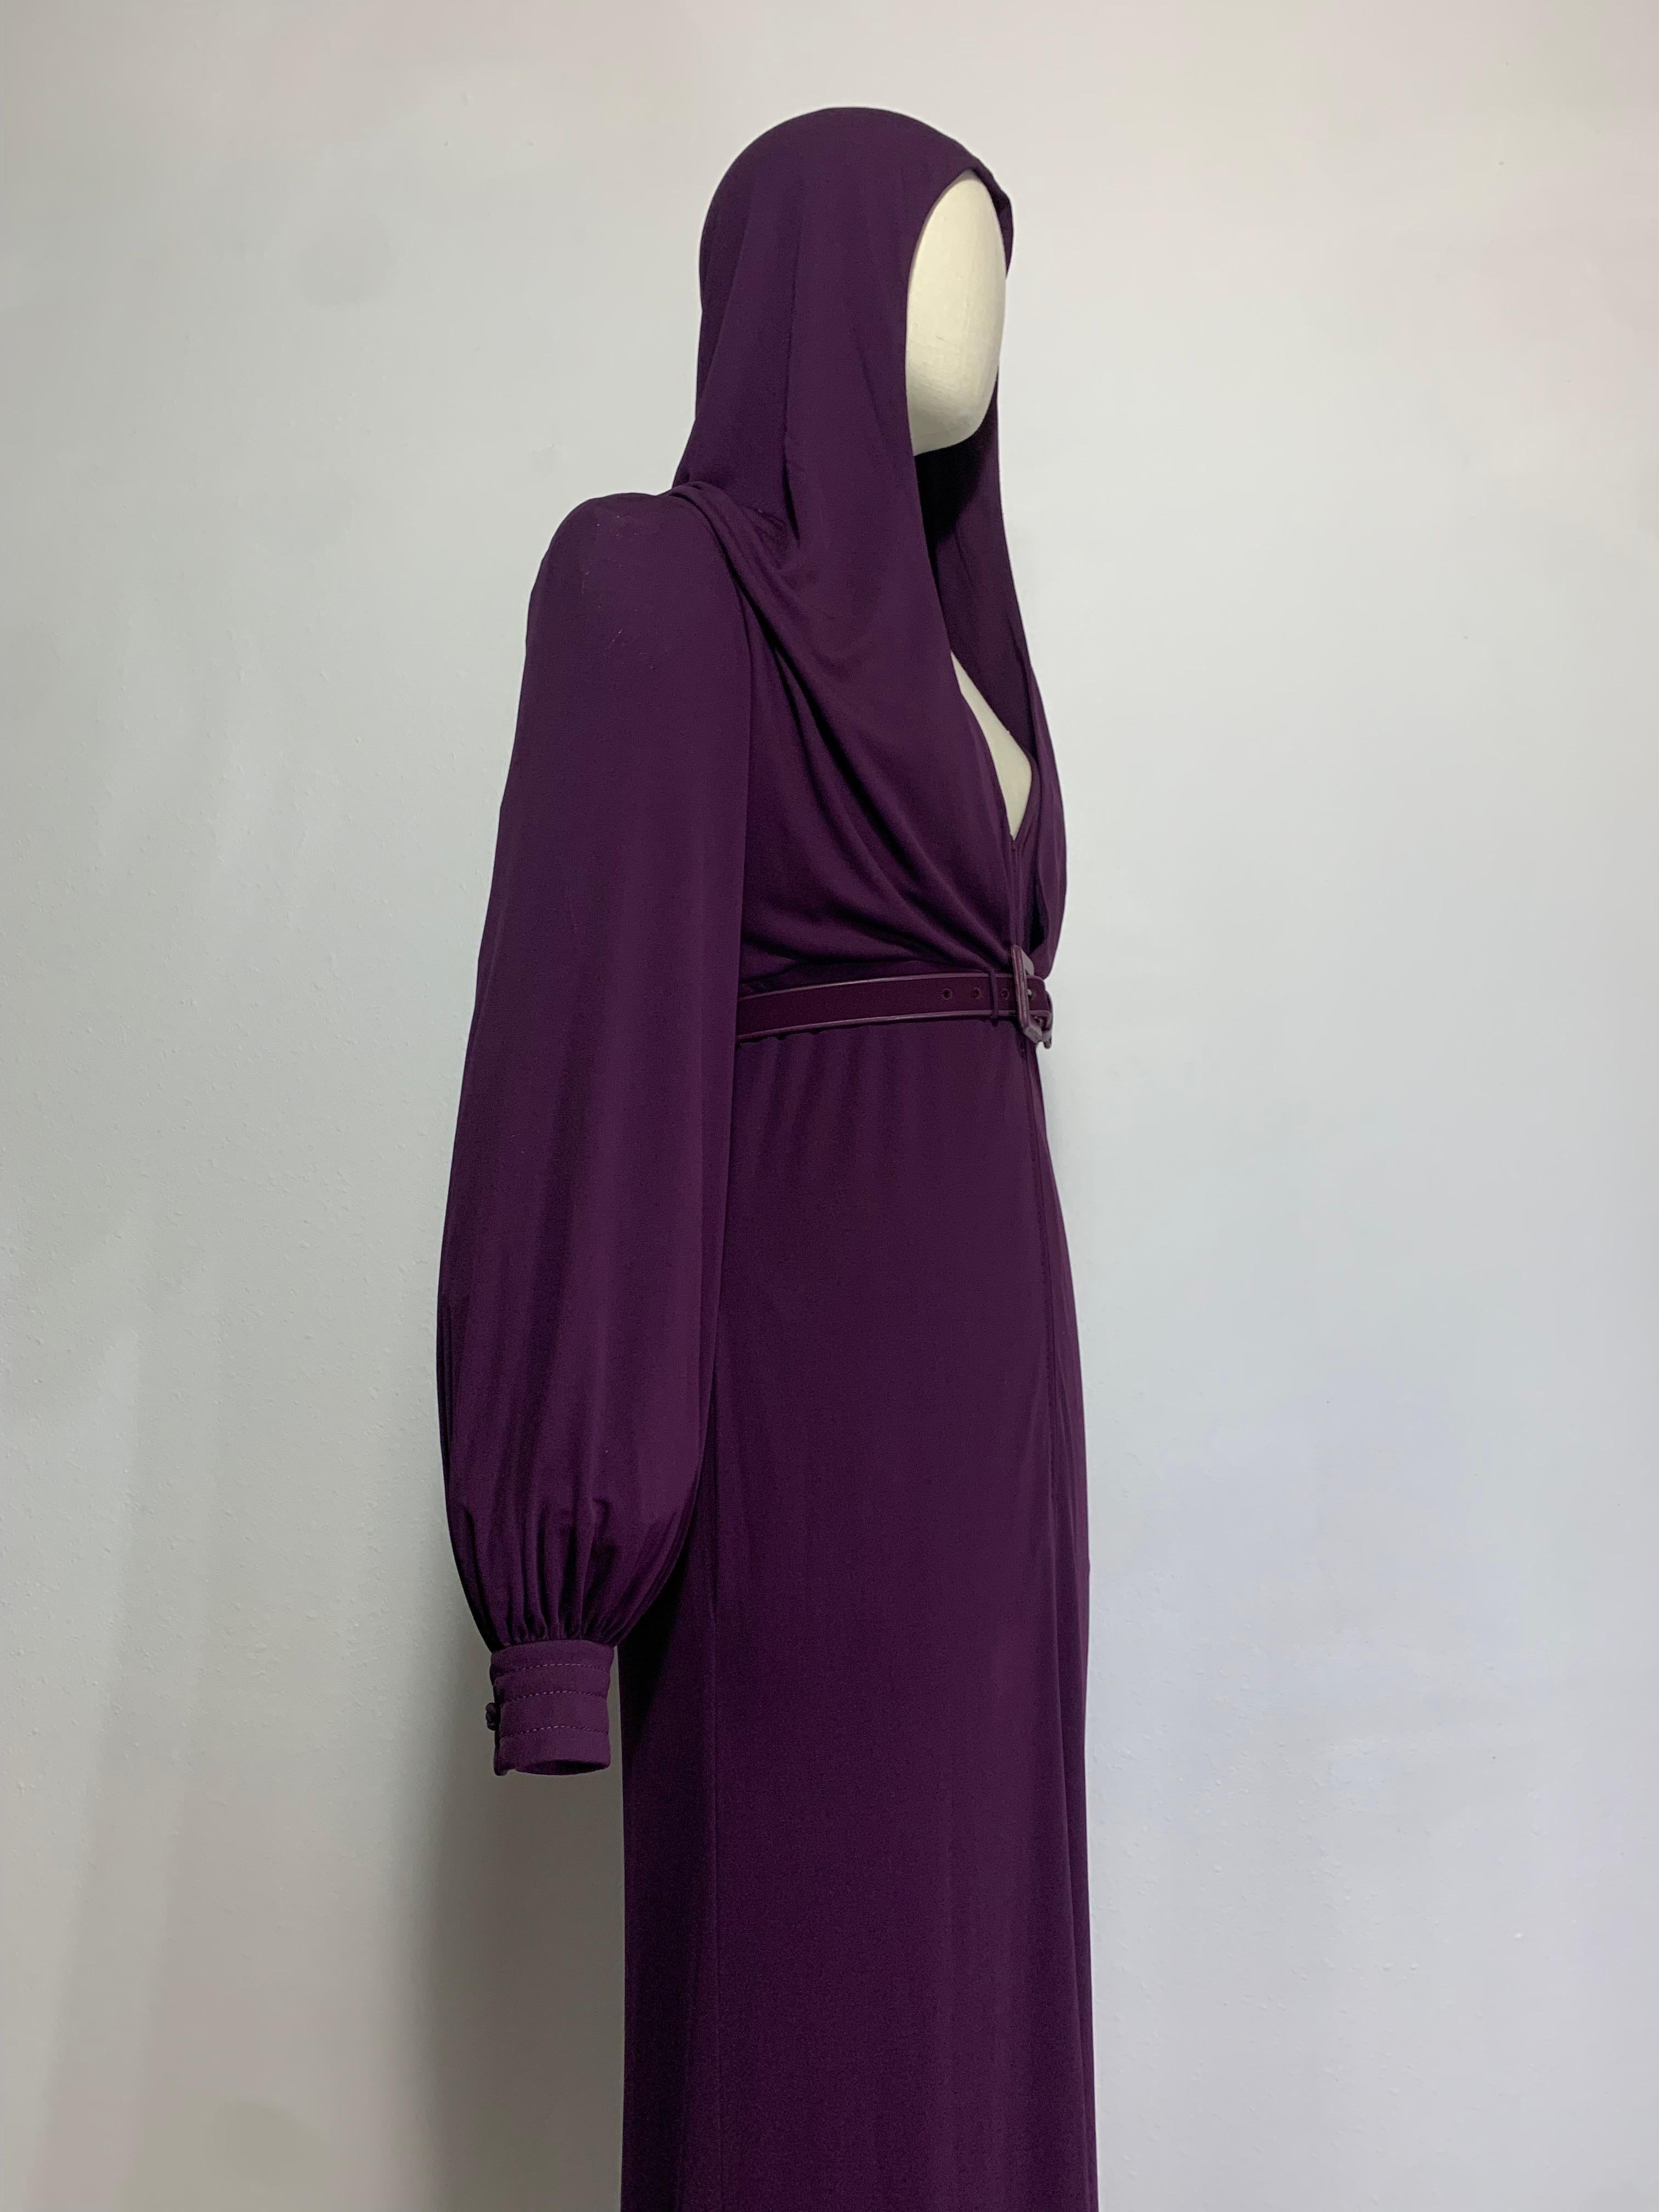 1975 James Galanos Dramatic Aubergine Jersey Maxi Gown w Fabulous Draped Hood For Sale 3